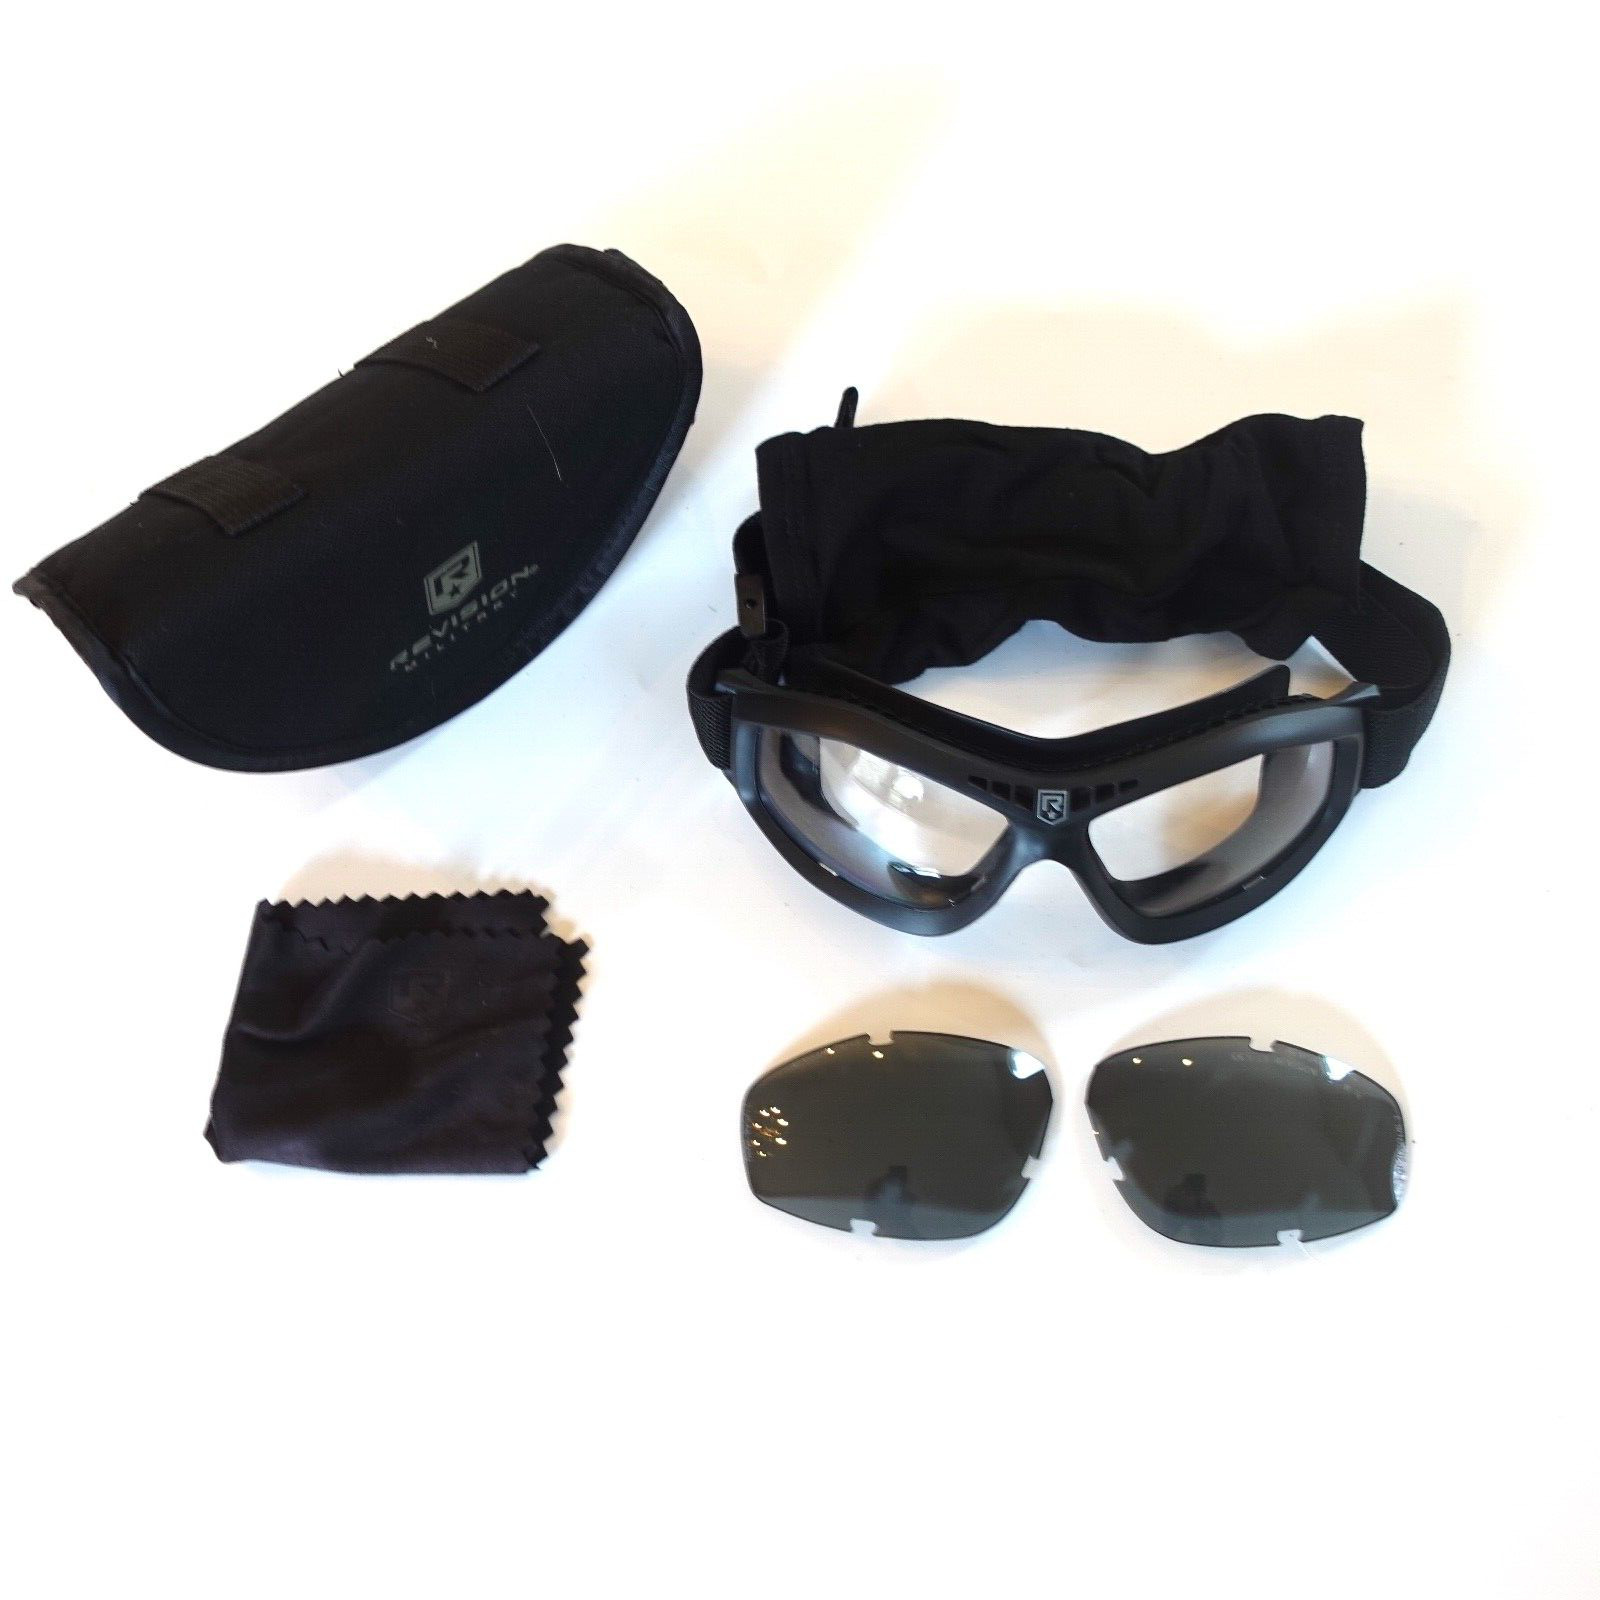 NEW REVISION MILITARY GOGGLES SET WITH CASE AND LENSES